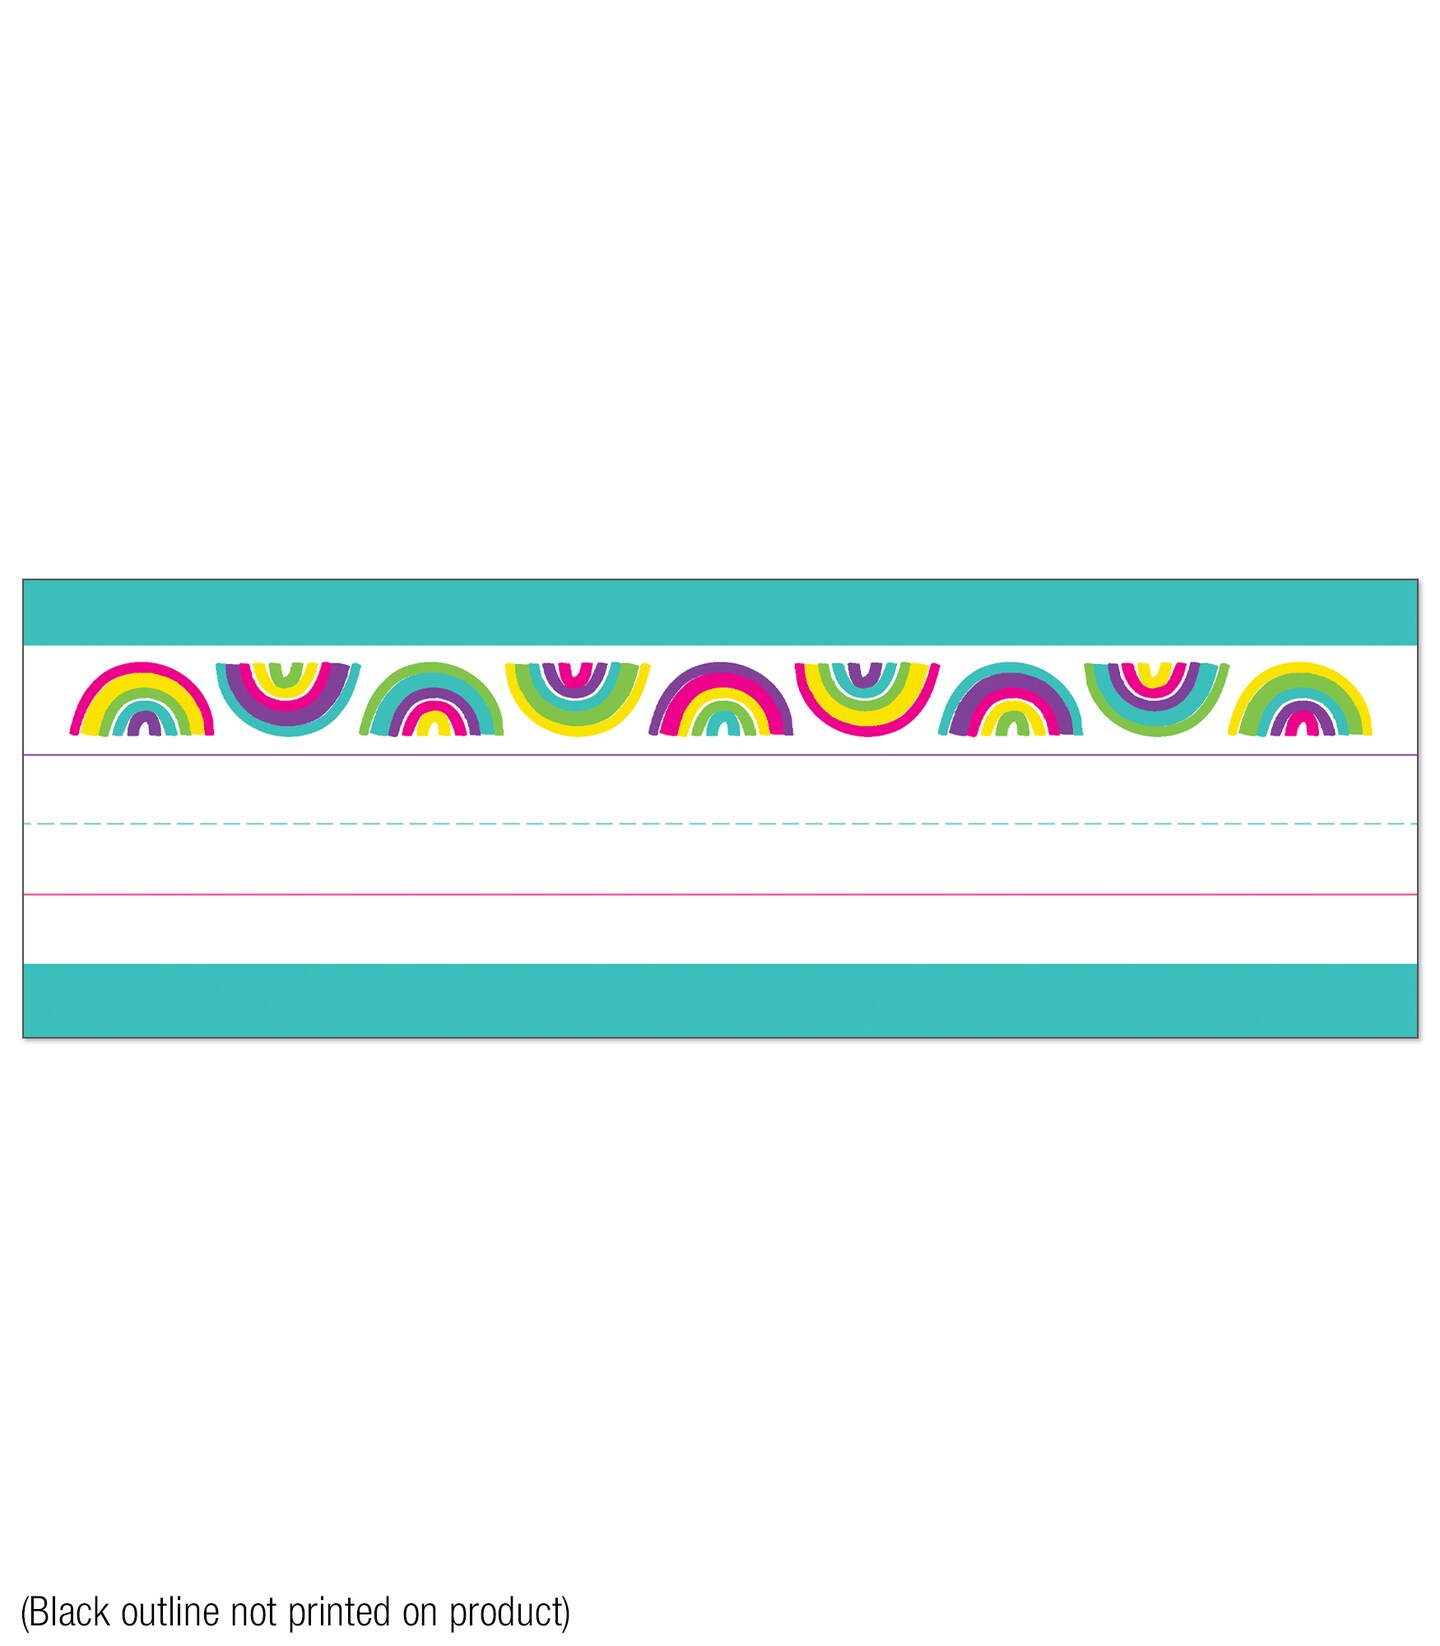 Carson Dellosa Kind Vibes 36-Piece Rainbow Classroom Nameplates, Colorful Student Desk Tags for Classrooms, Cubbies, Desks, Locker Labels and Classroom Organization